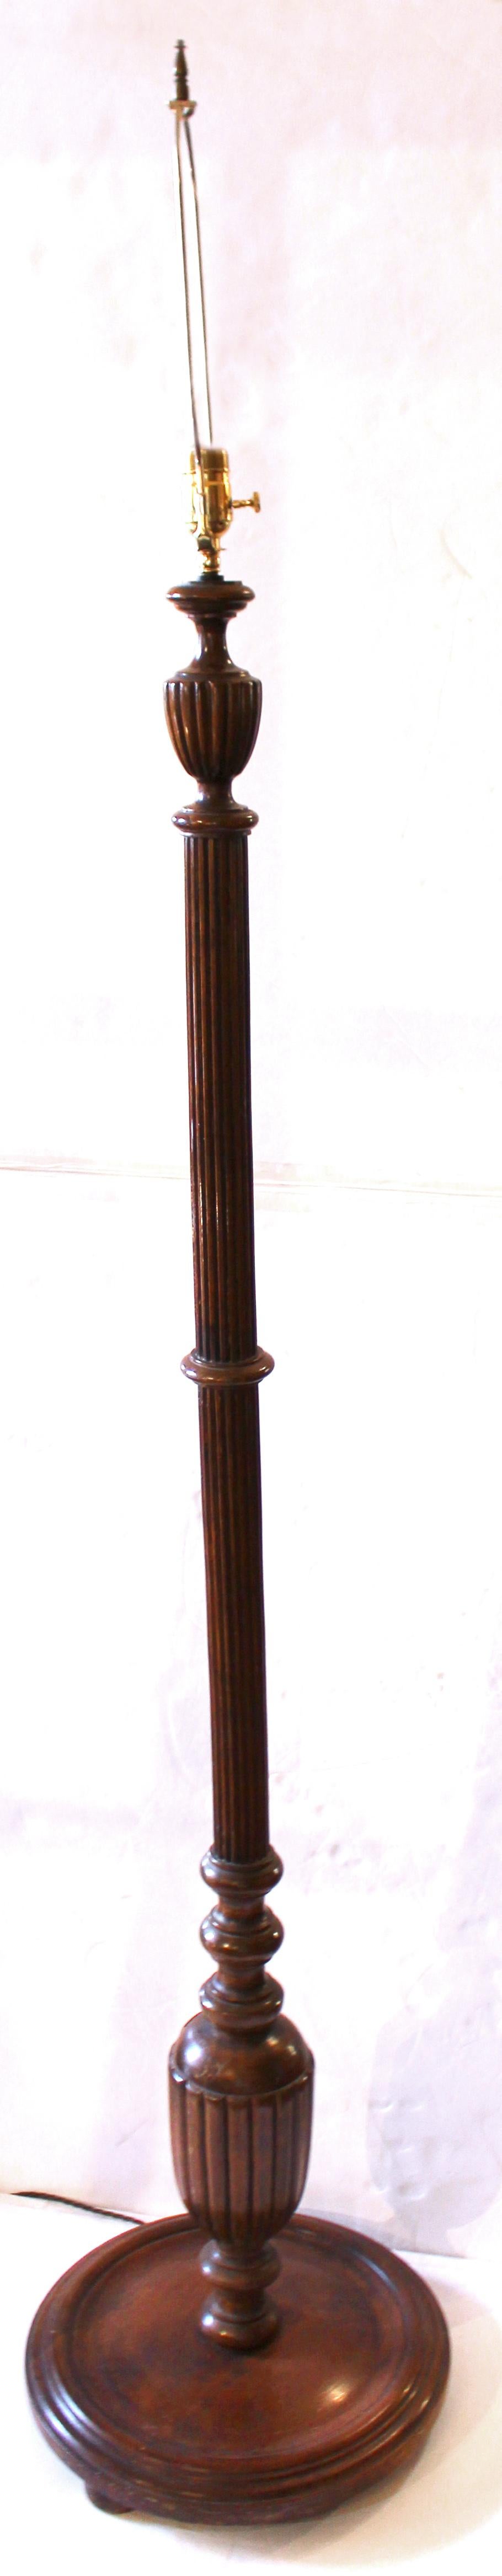 Early 20th century carved wood floor lamp, English. Likely made from a much earlier bed post or torchiere. Mahogany. The shaft well reeded ending in bulbous turnings and disc base. Slight warp in the shaft, noticeable from one direction but not the